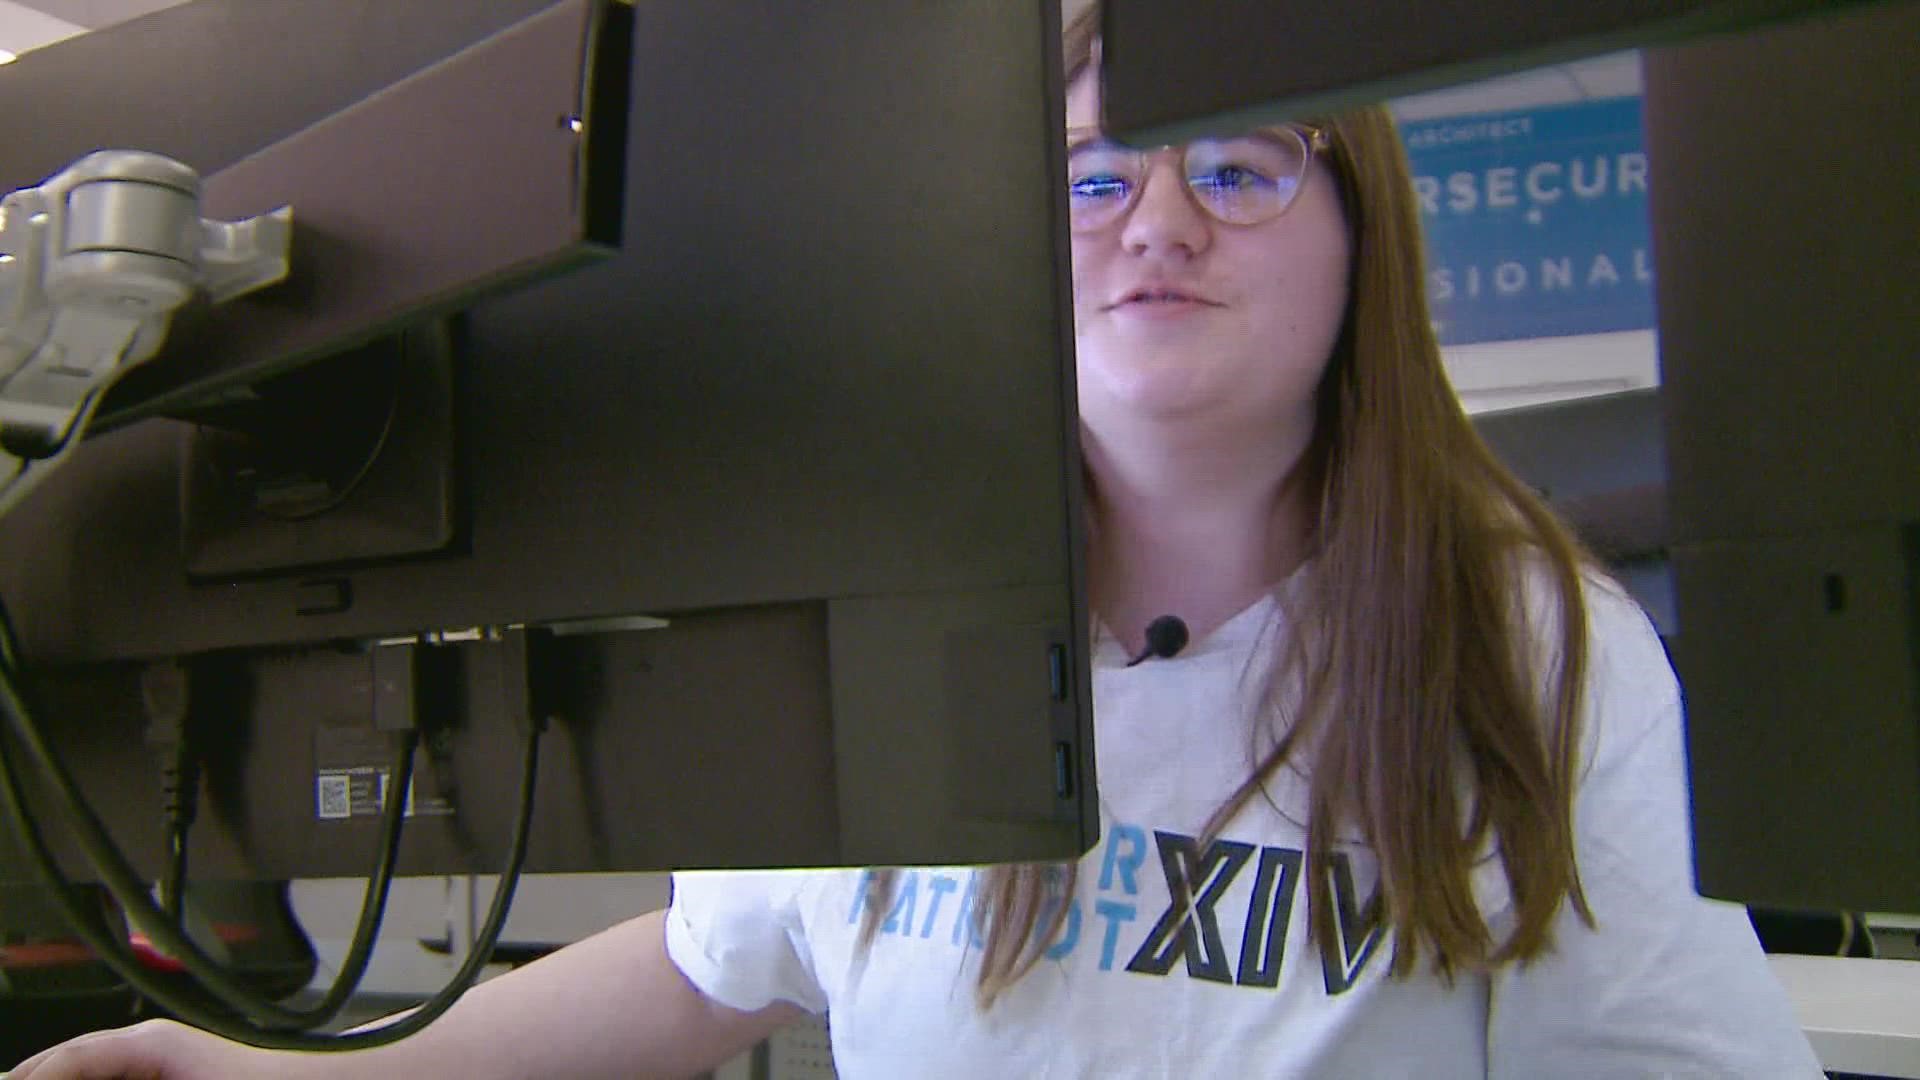 “It’s pretty fun especially to see a focus being on women in technology and trying to get more women in the field," said Reilly Harrington, 16.